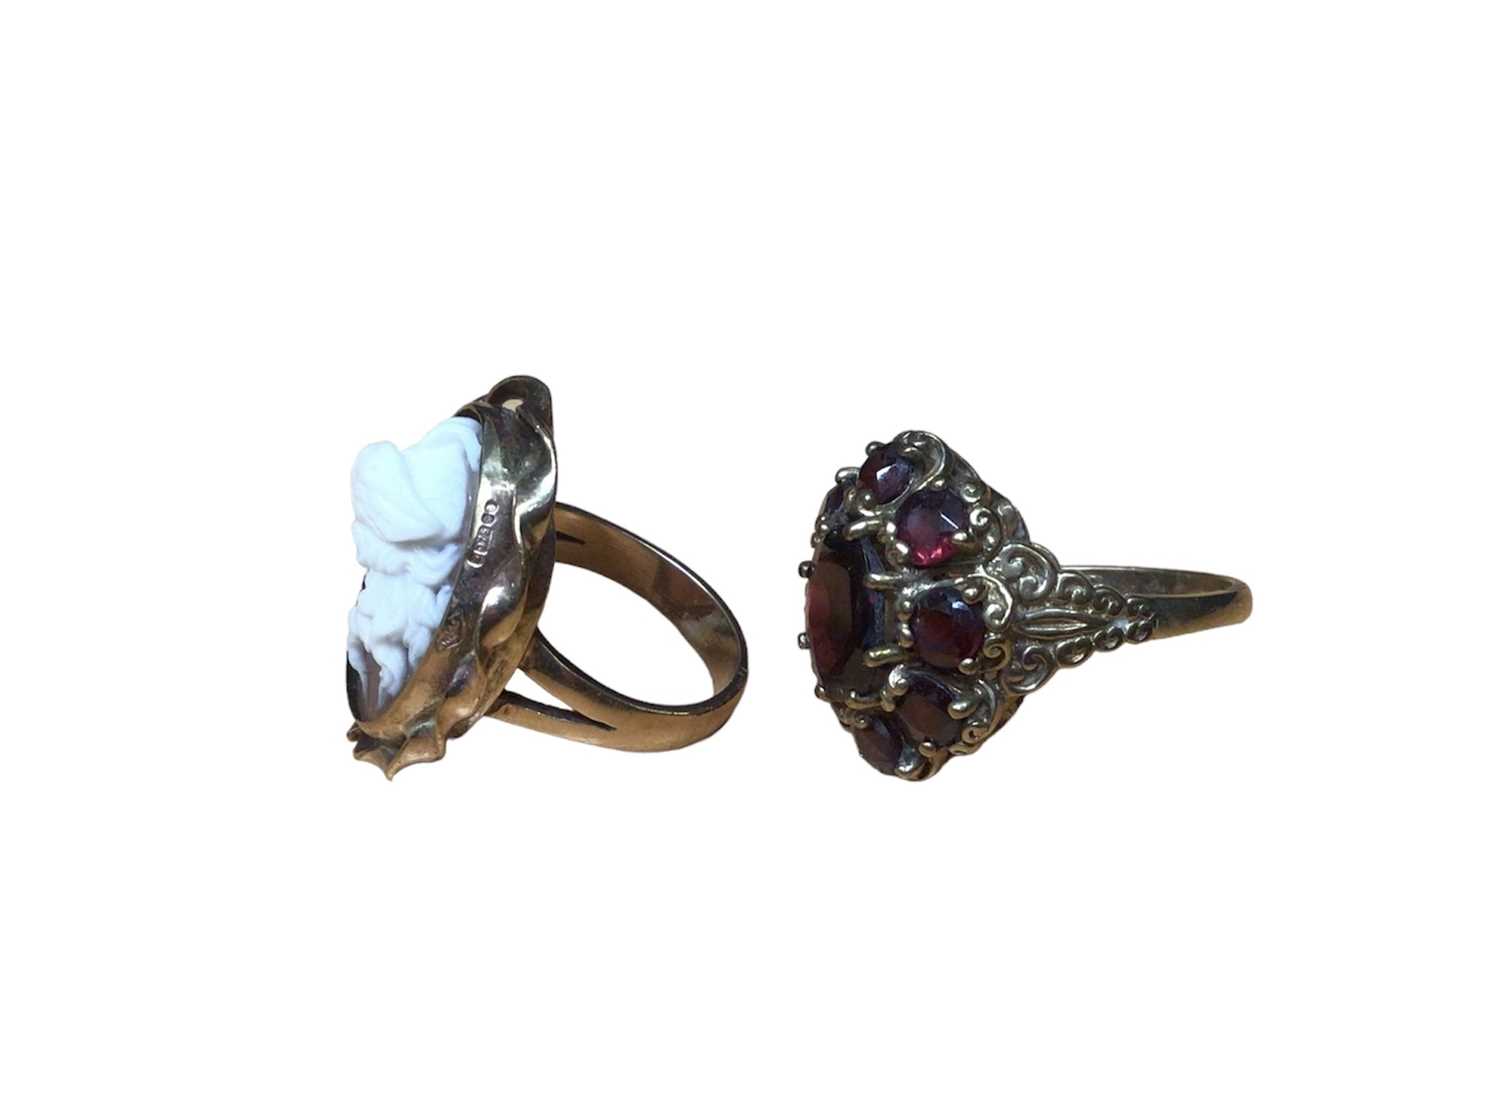 9ct gold mounted carved shell cameo ring and 9ct gold garnet cluster ring (2) - Image 2 of 3